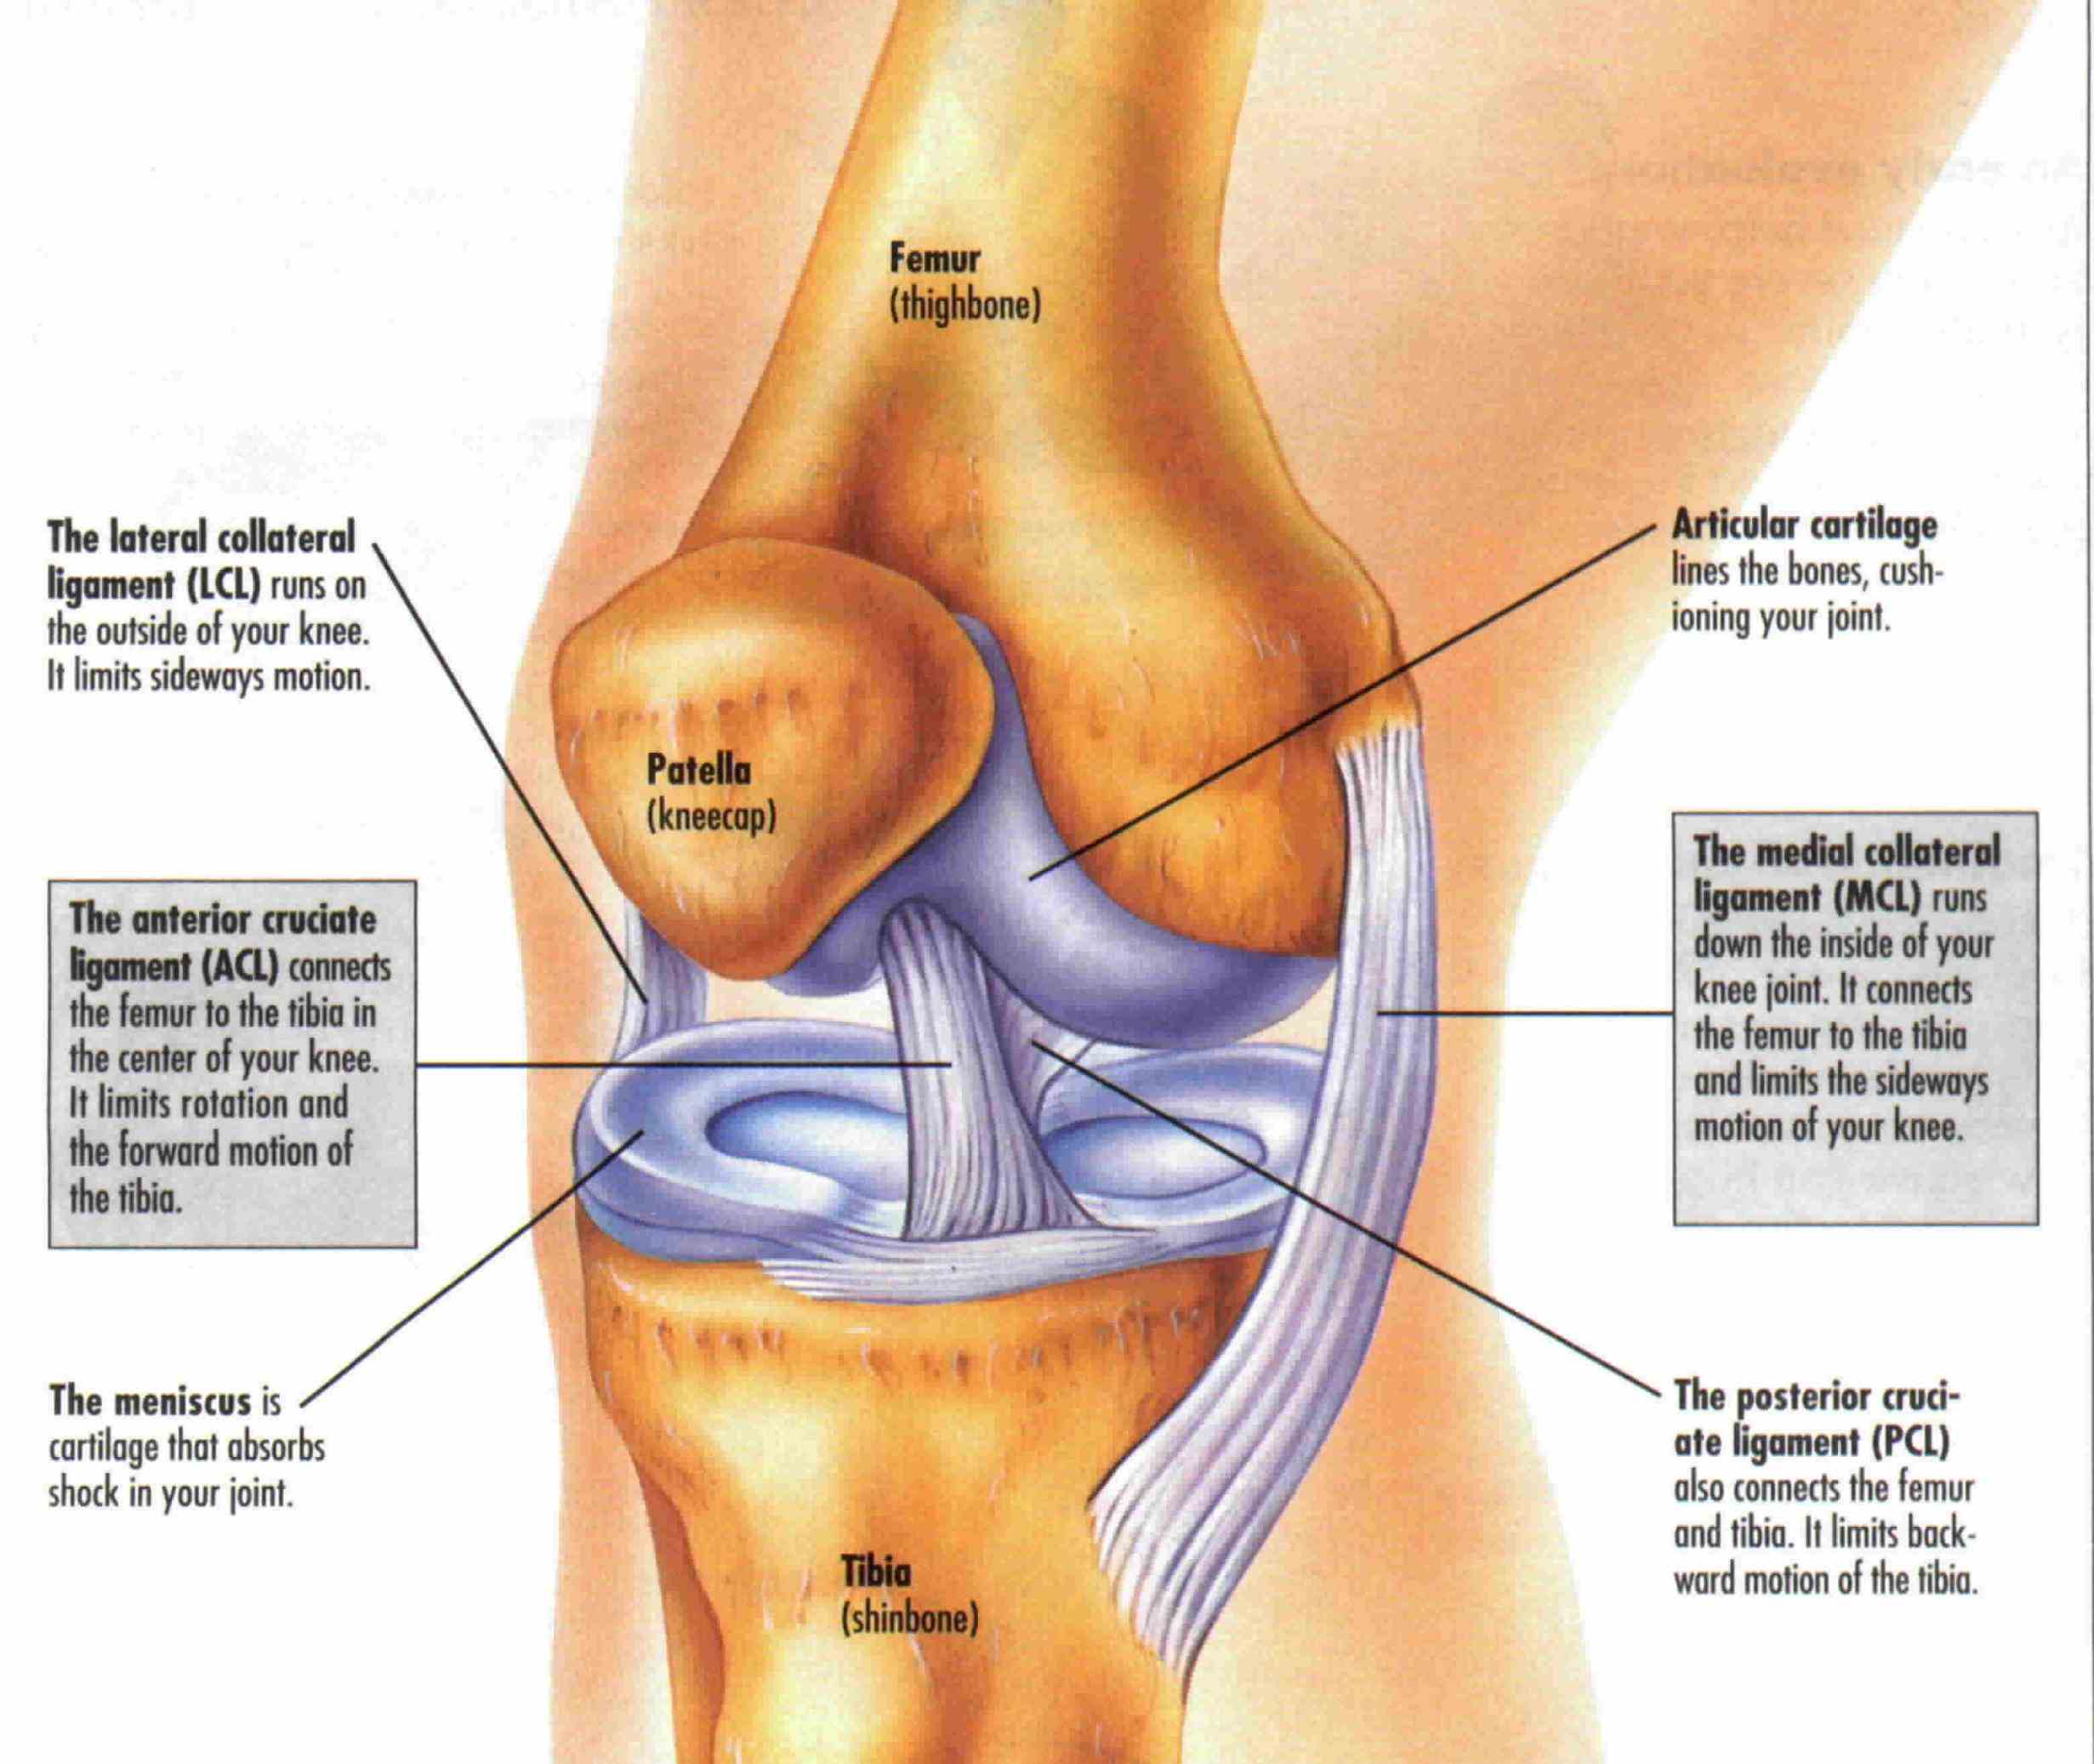 de Anatomy Of Knee Ligaments mar webmds knee anatomy page provides a detailed image and definition of the